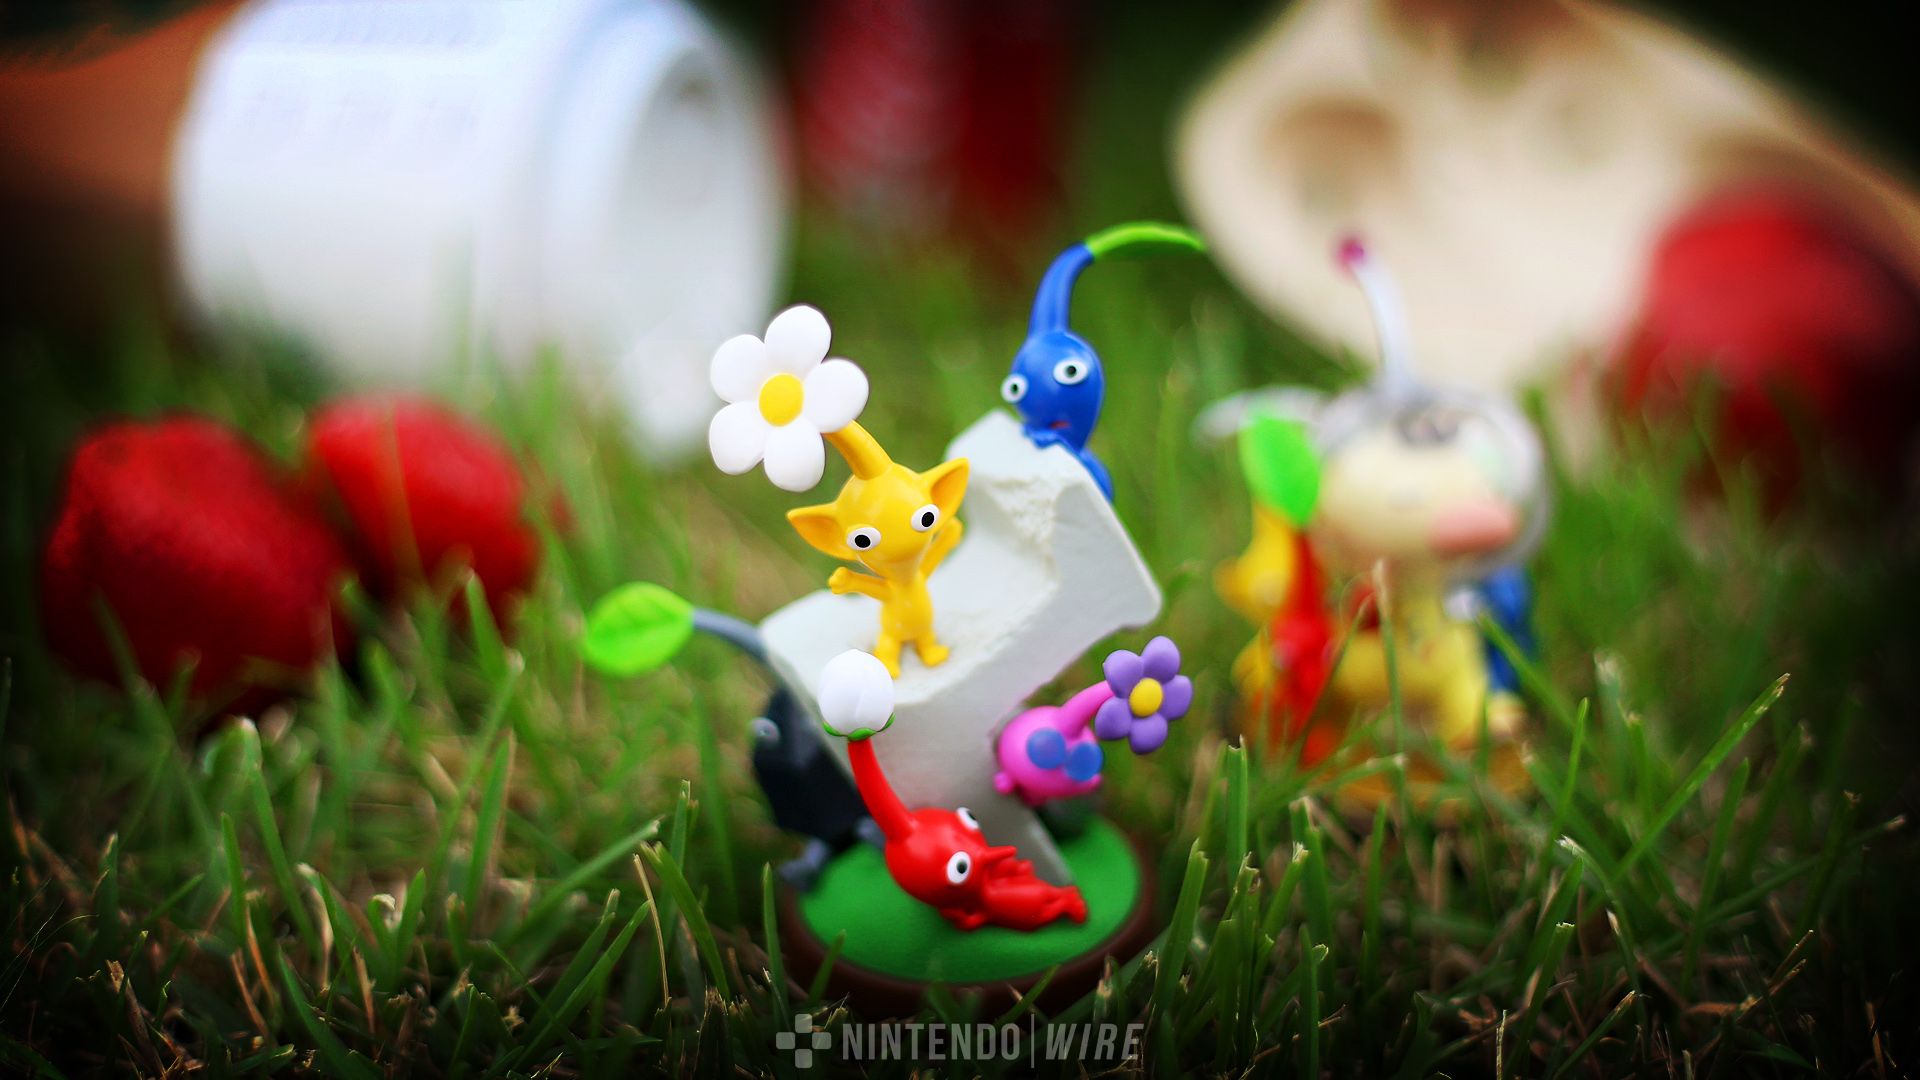 Nintendo Wire's third free wallpaper for July featuring Hey! Pikmin amiibo